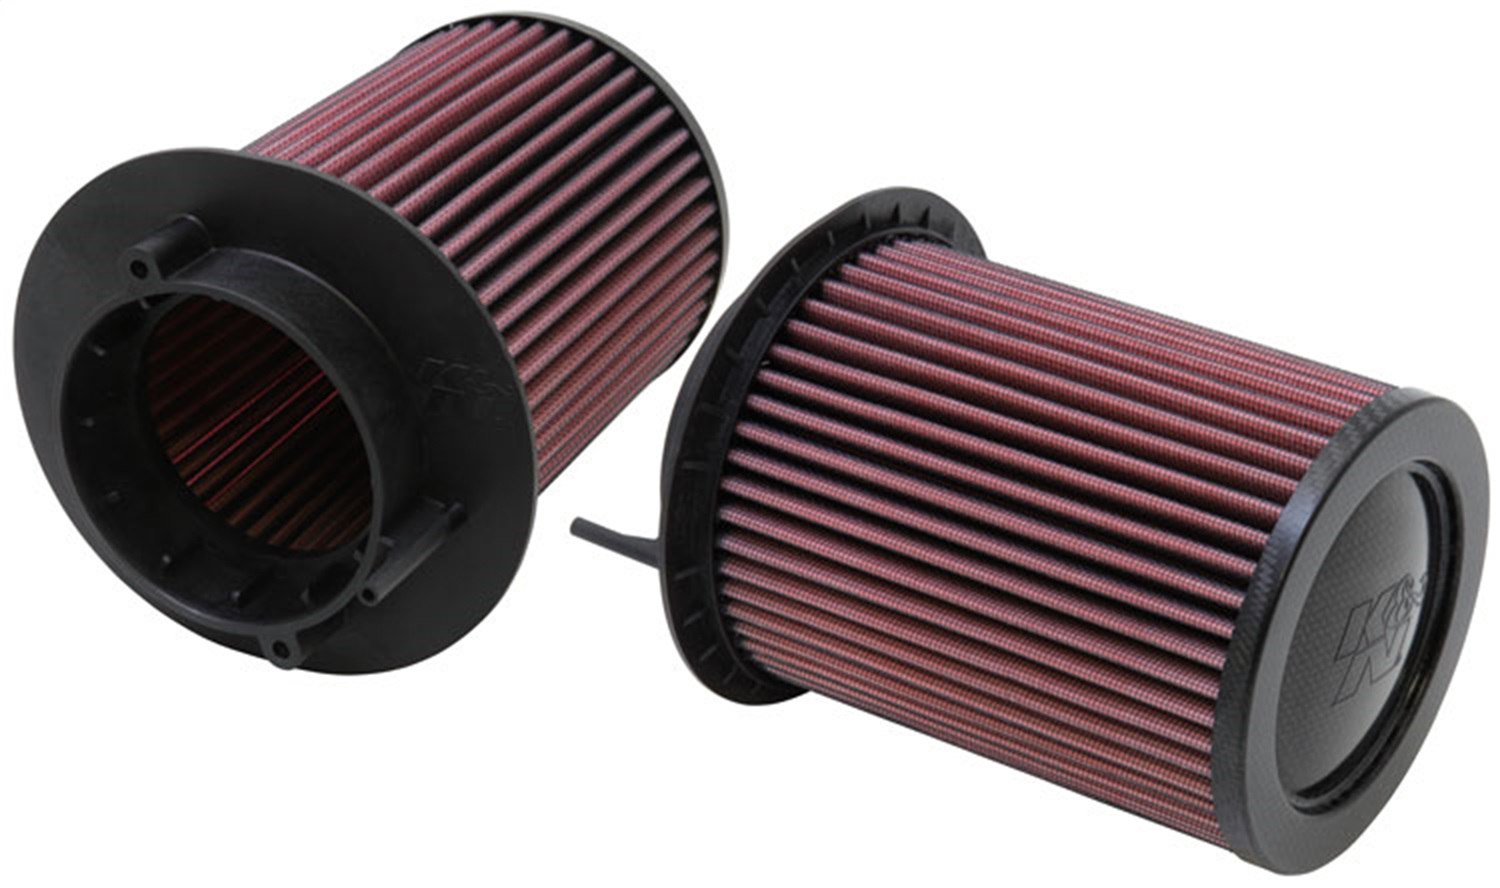 K&N Filters K&N Filters E-0668 Air Filter Fits 08-14 Boxster Cayman R8